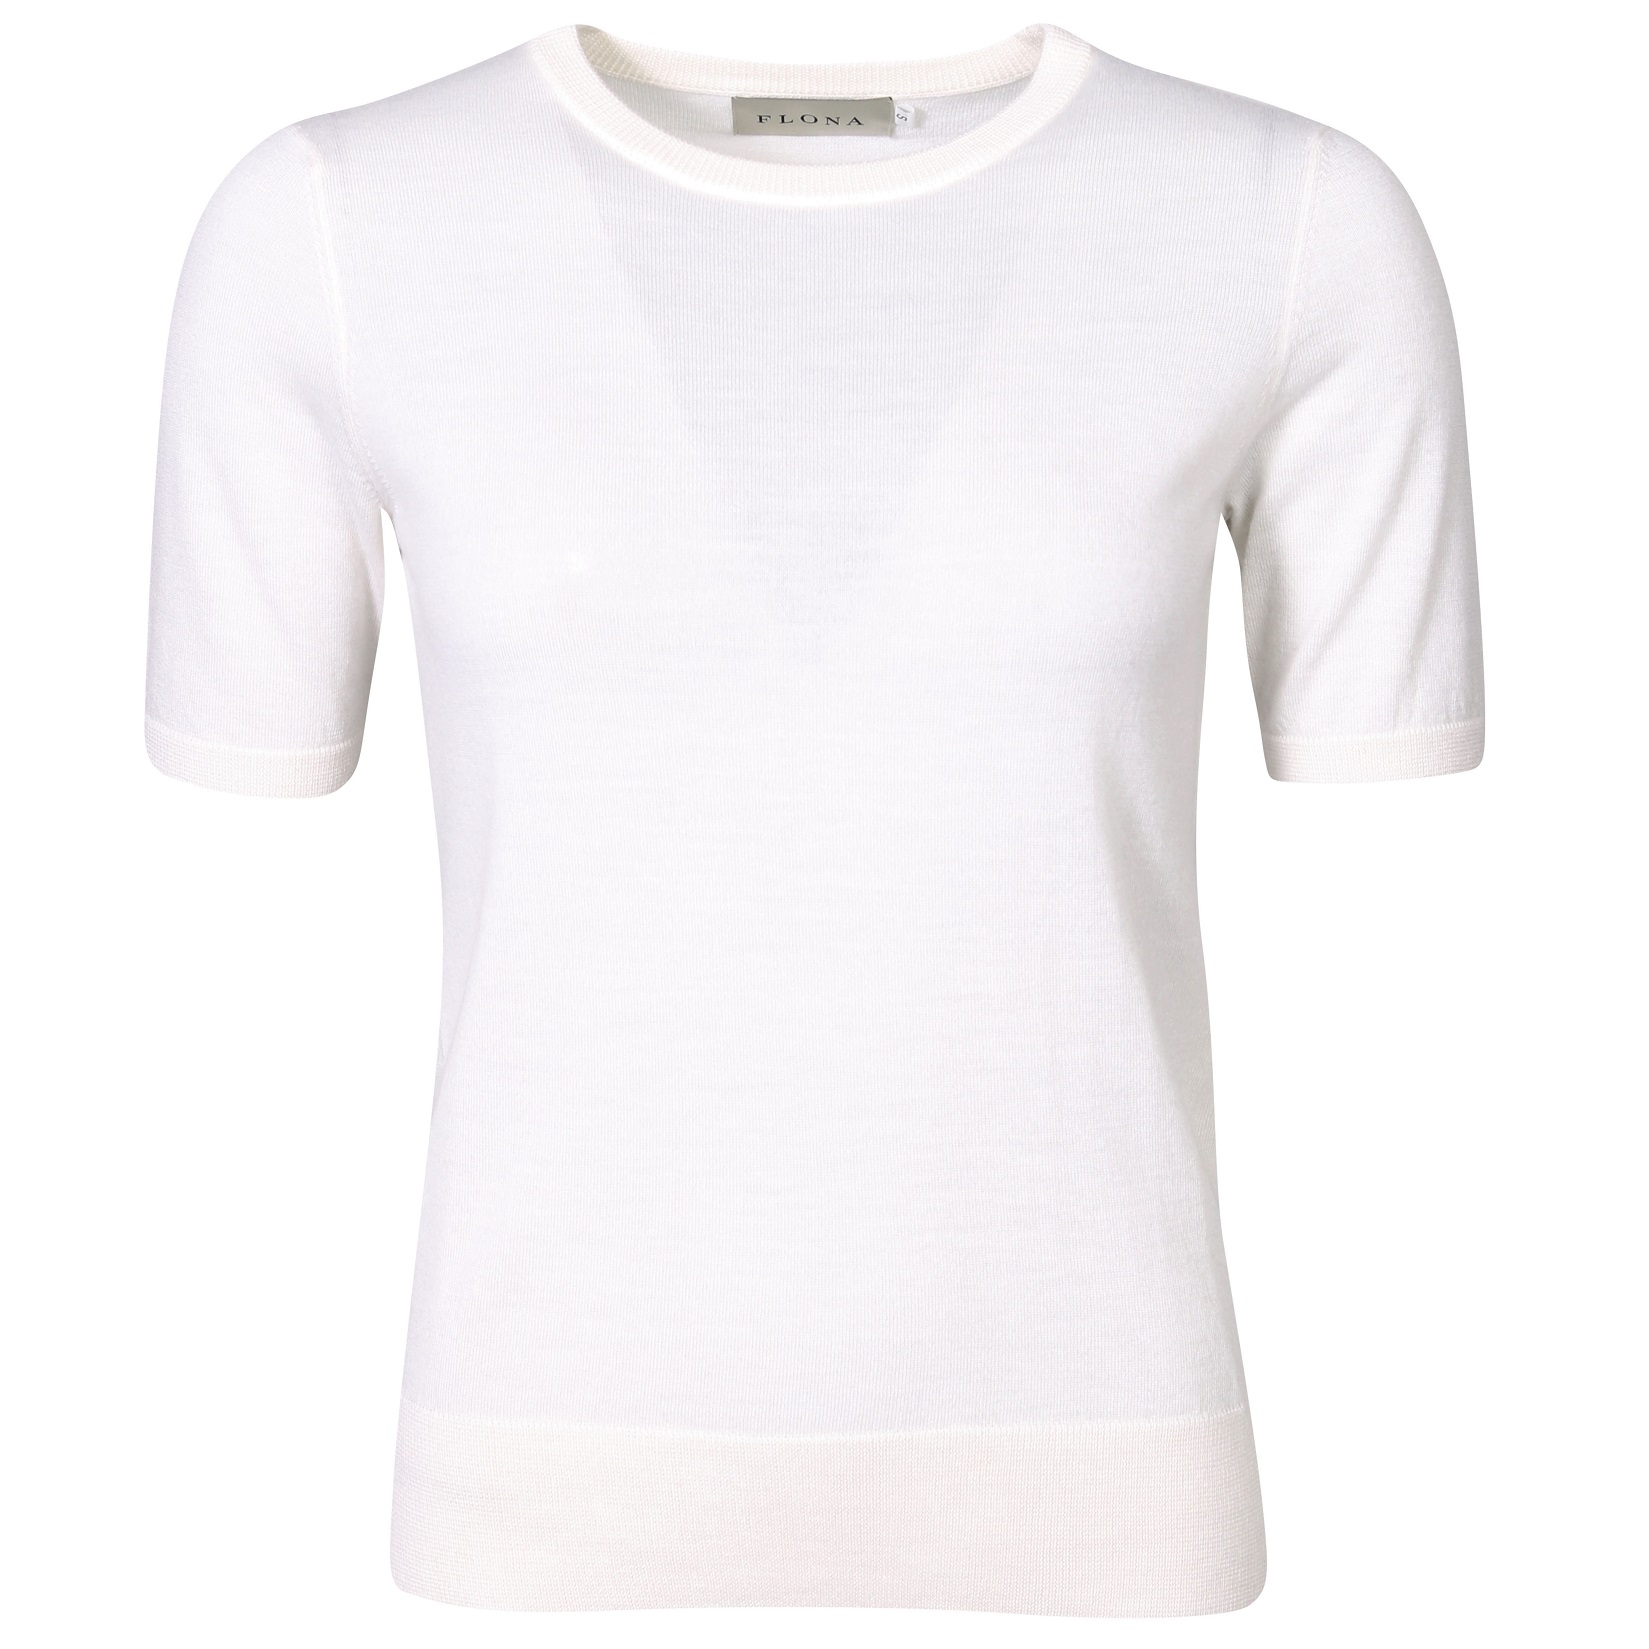 FLONA Cashmere T-Shirt in Off White M